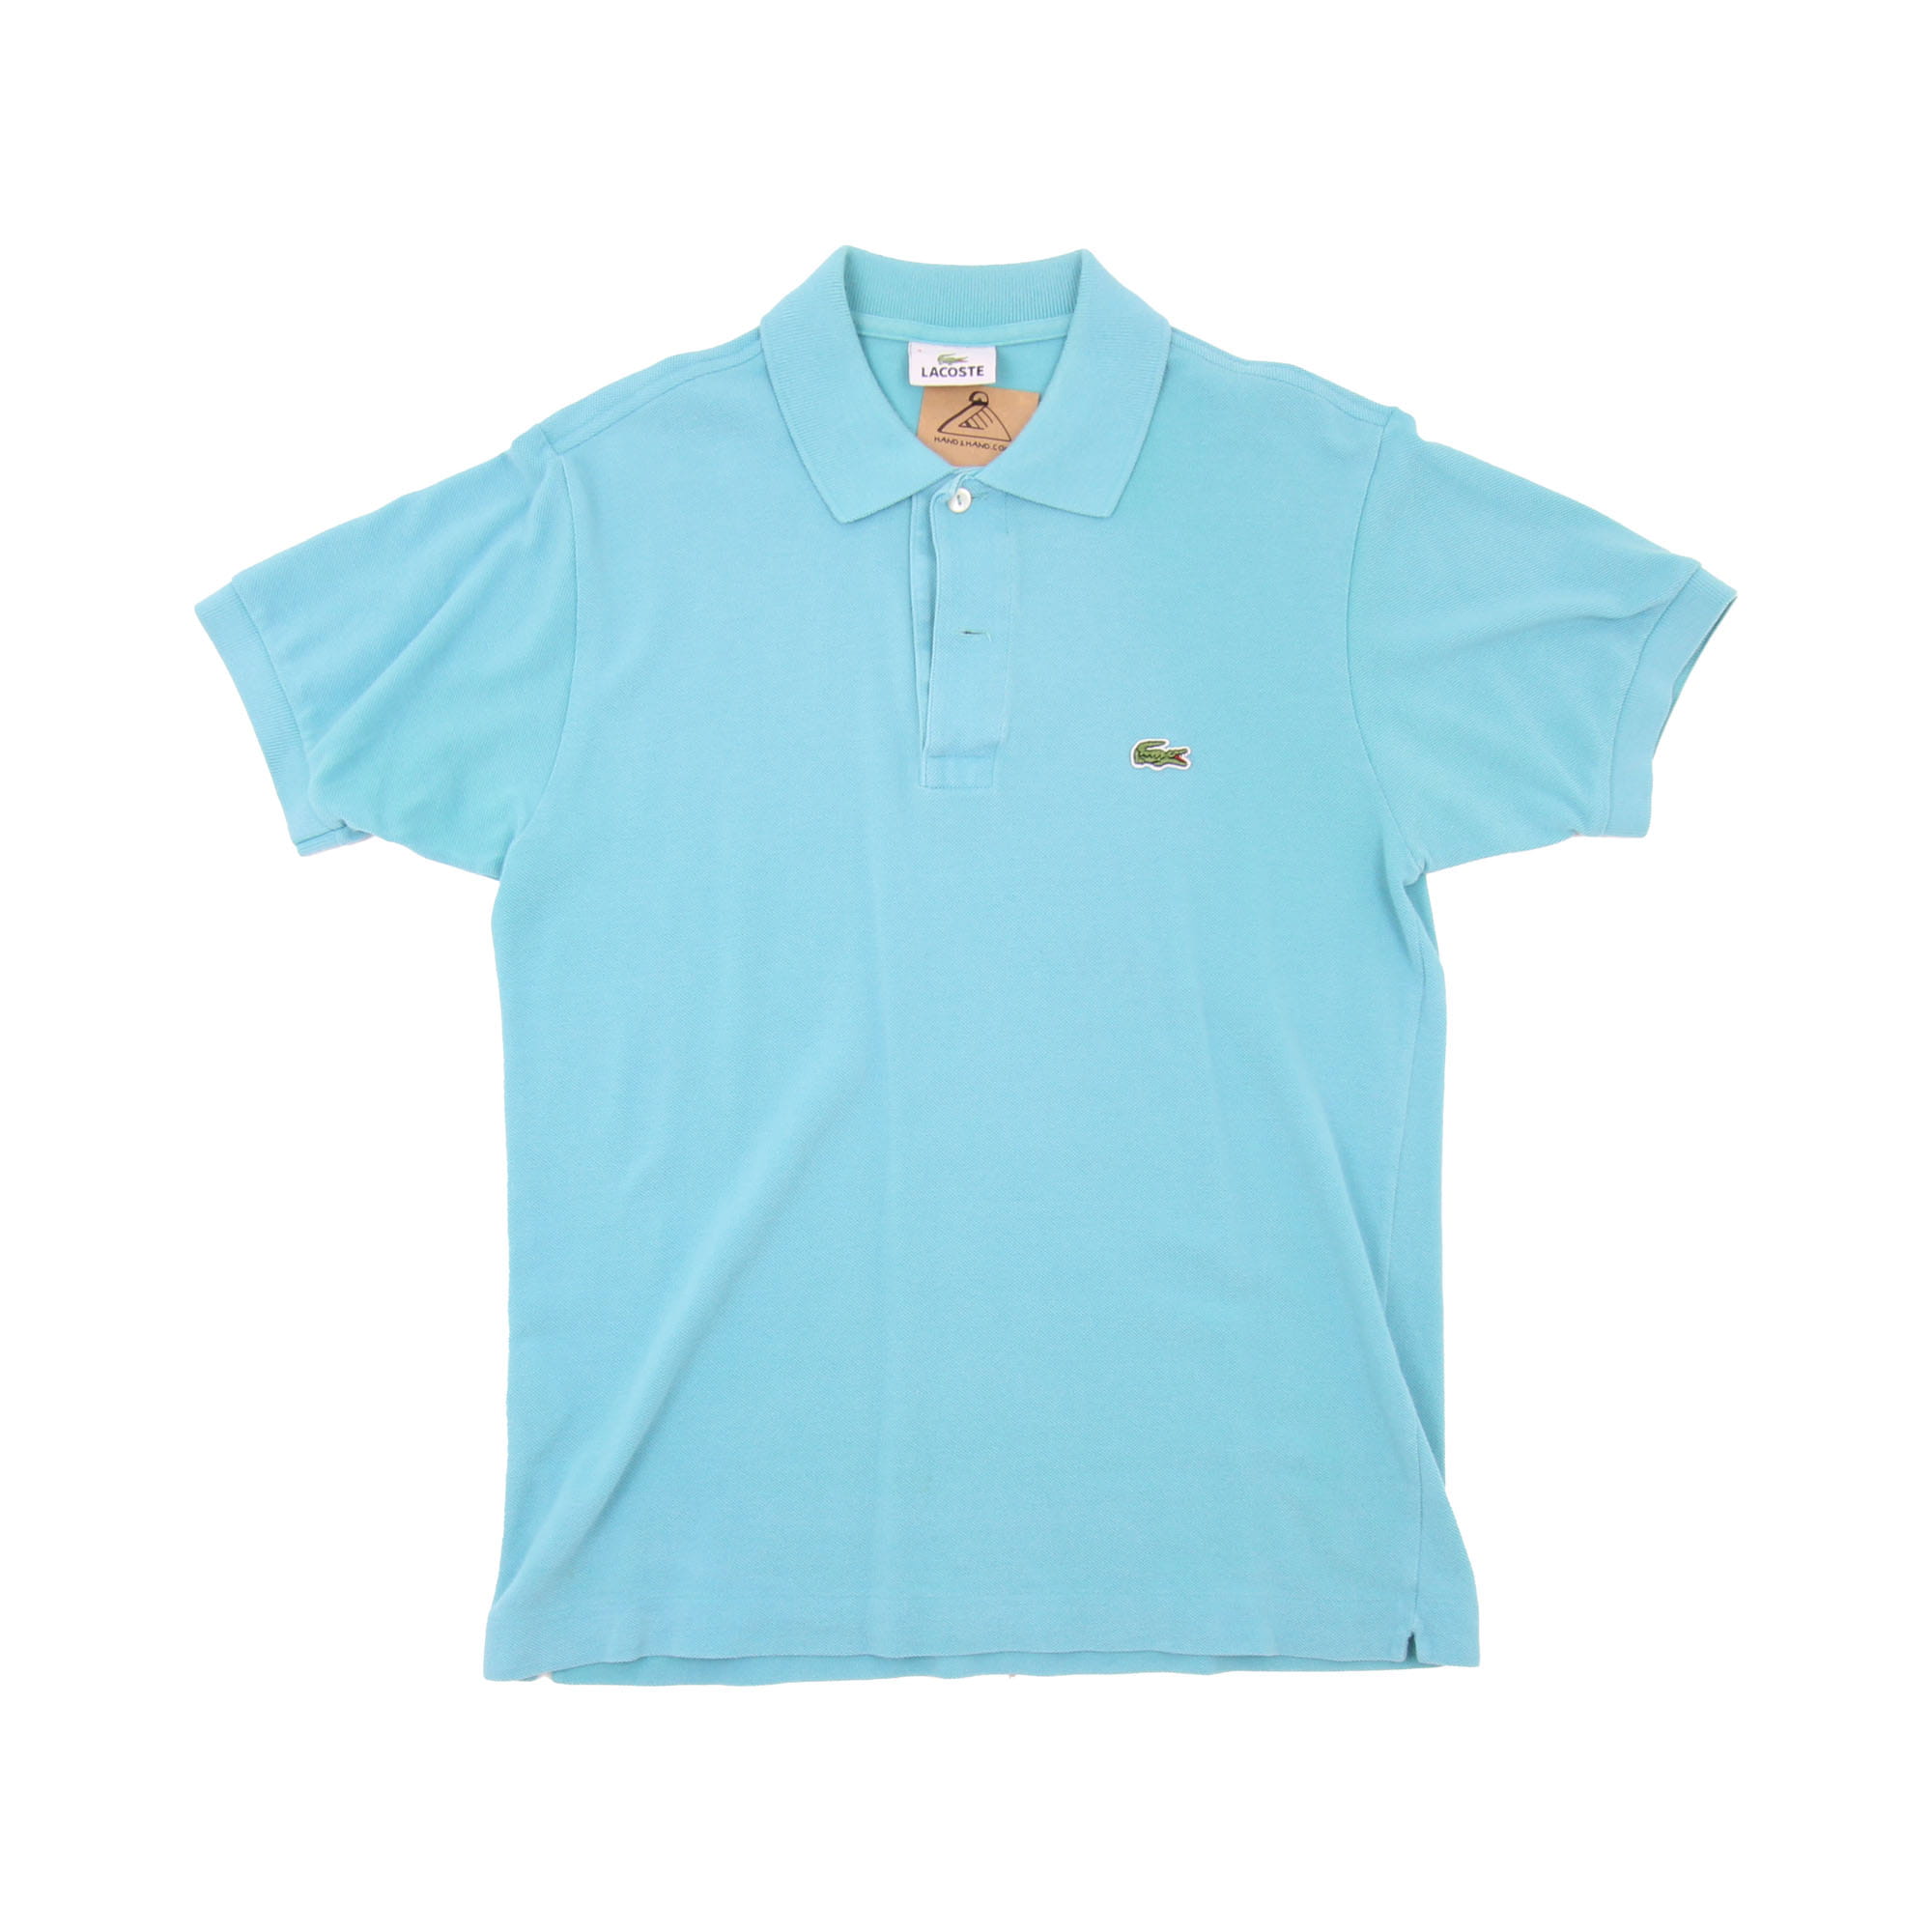 Lacoste Embroidered Logo Polo Shirt -  S